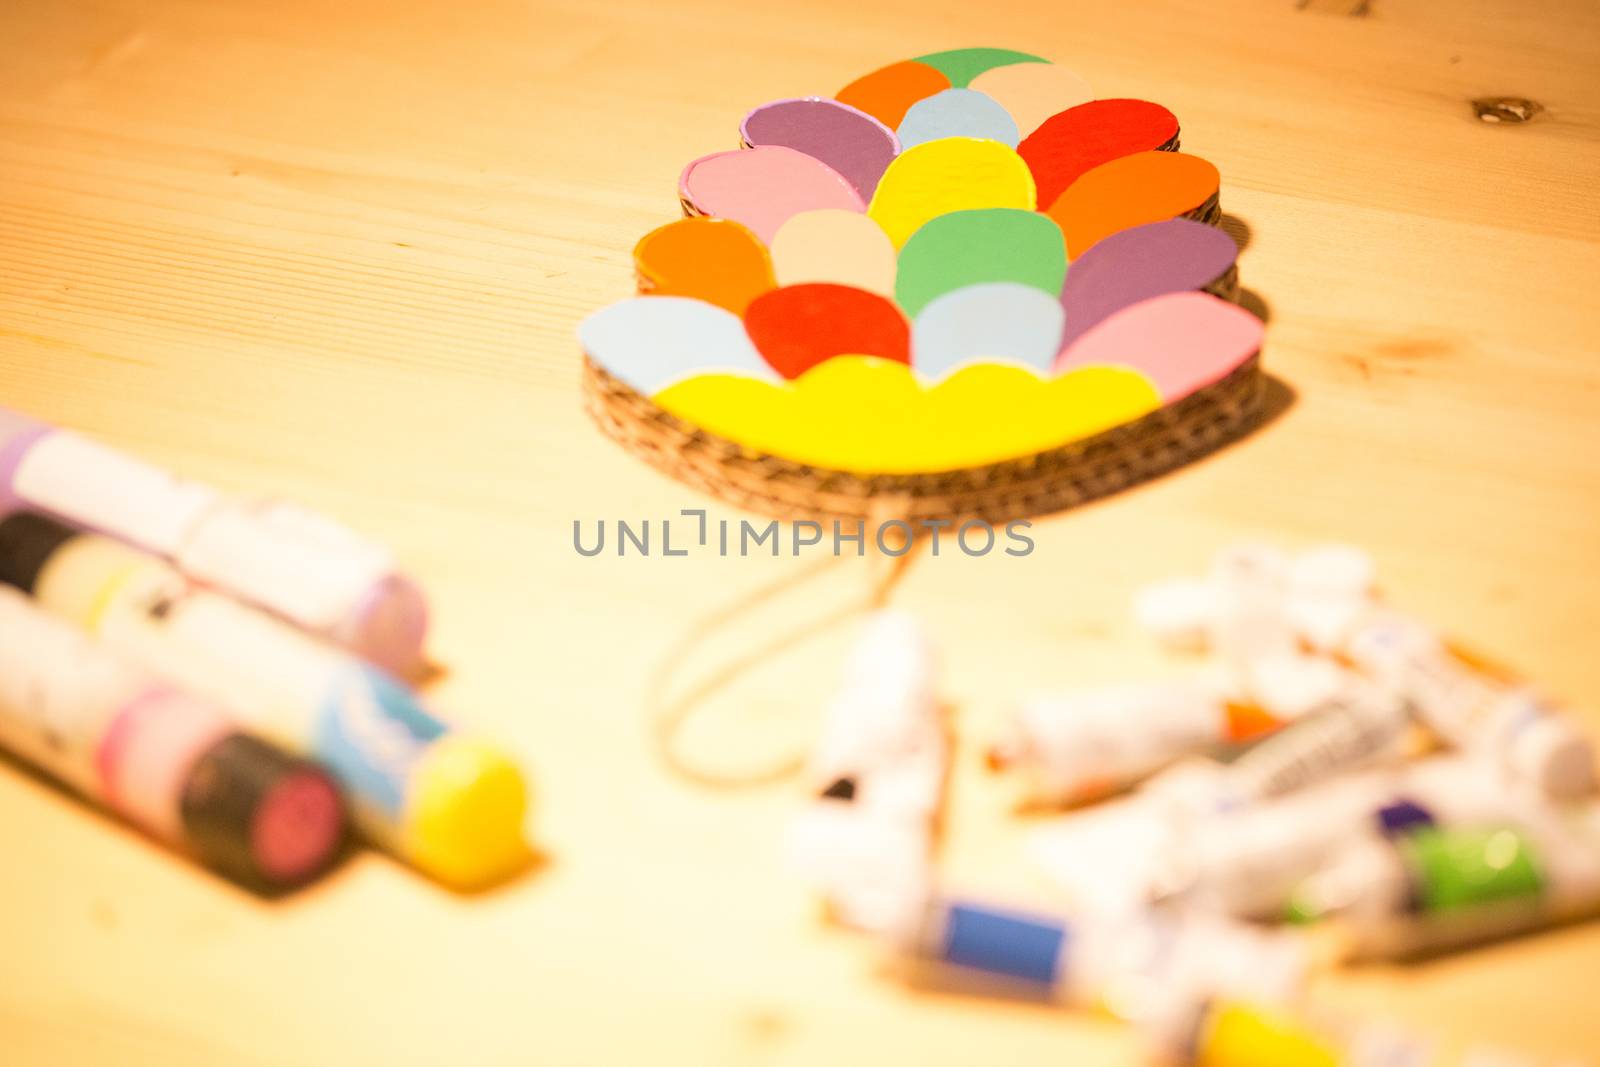 Colorful toys made of cardboard on a wooden table. by sarymsakov